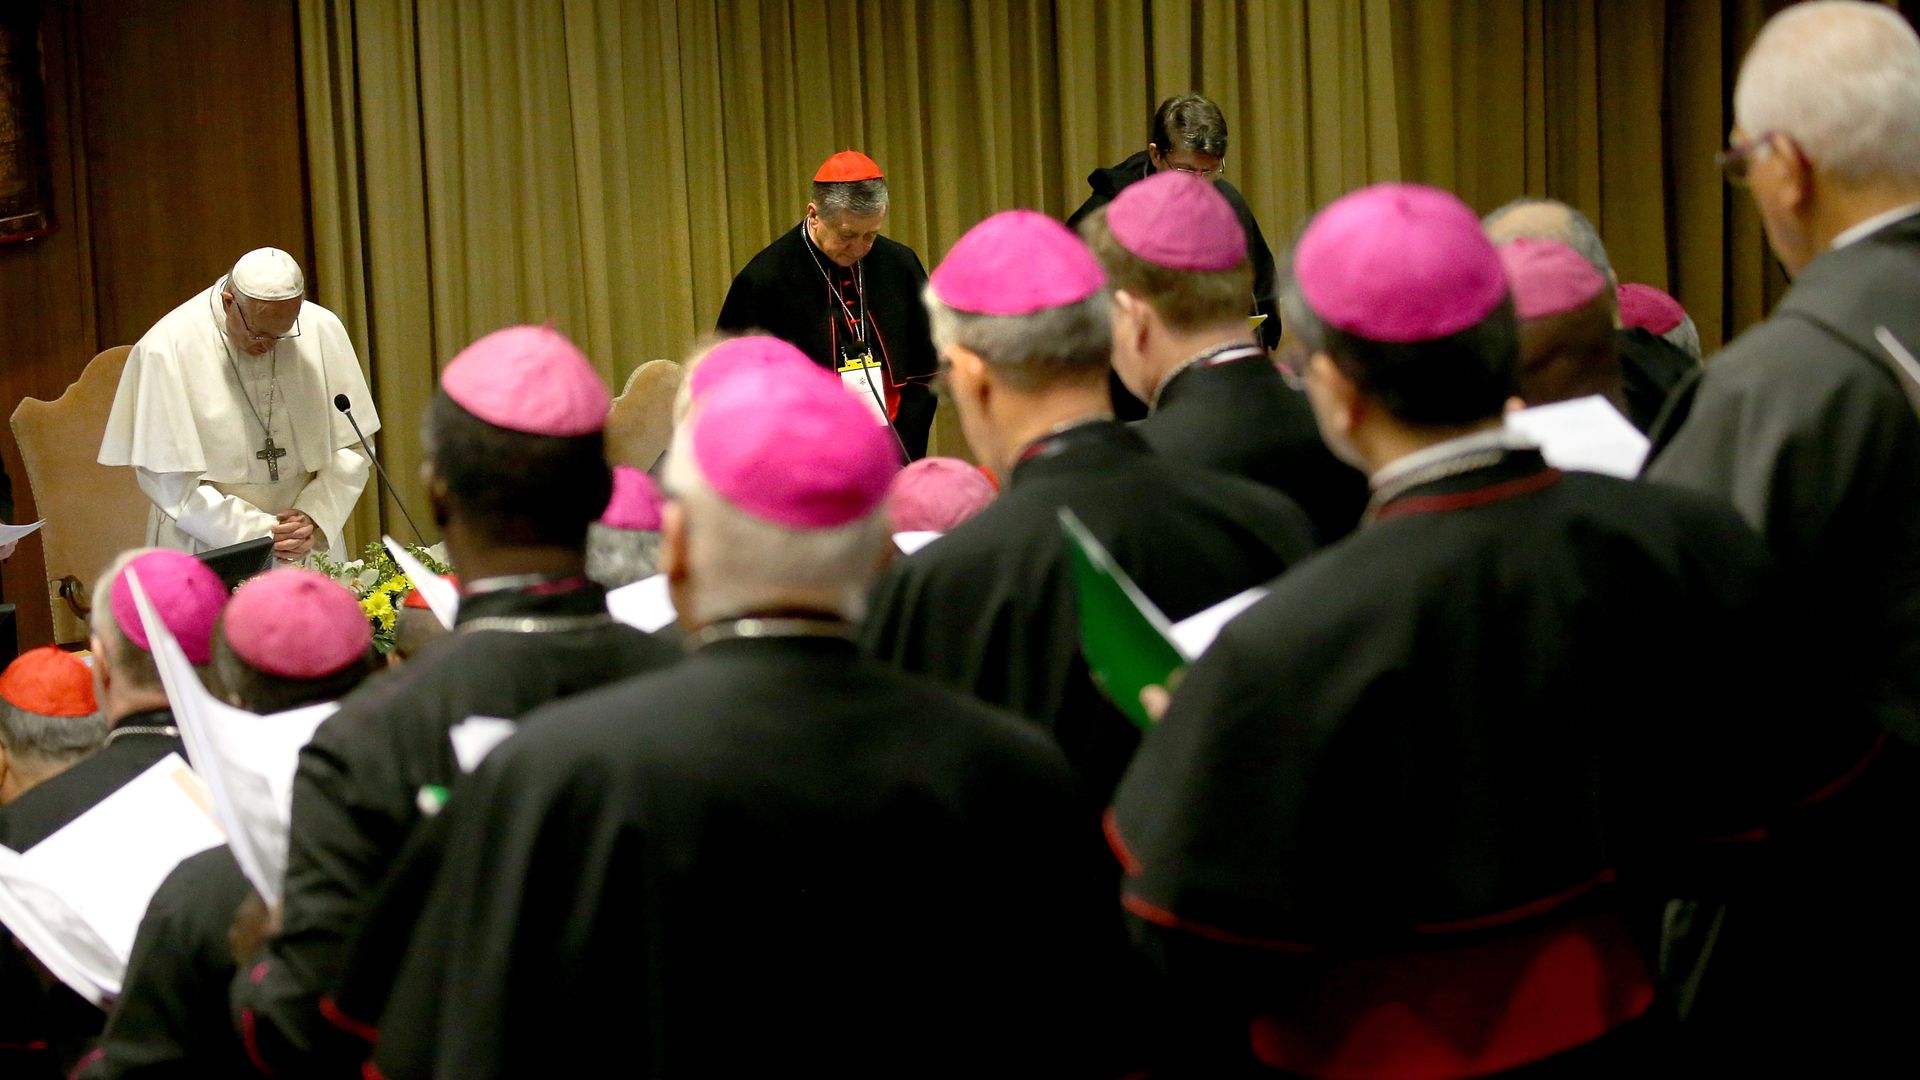 In this image, the Pope stands in front of a crowd of clergy members